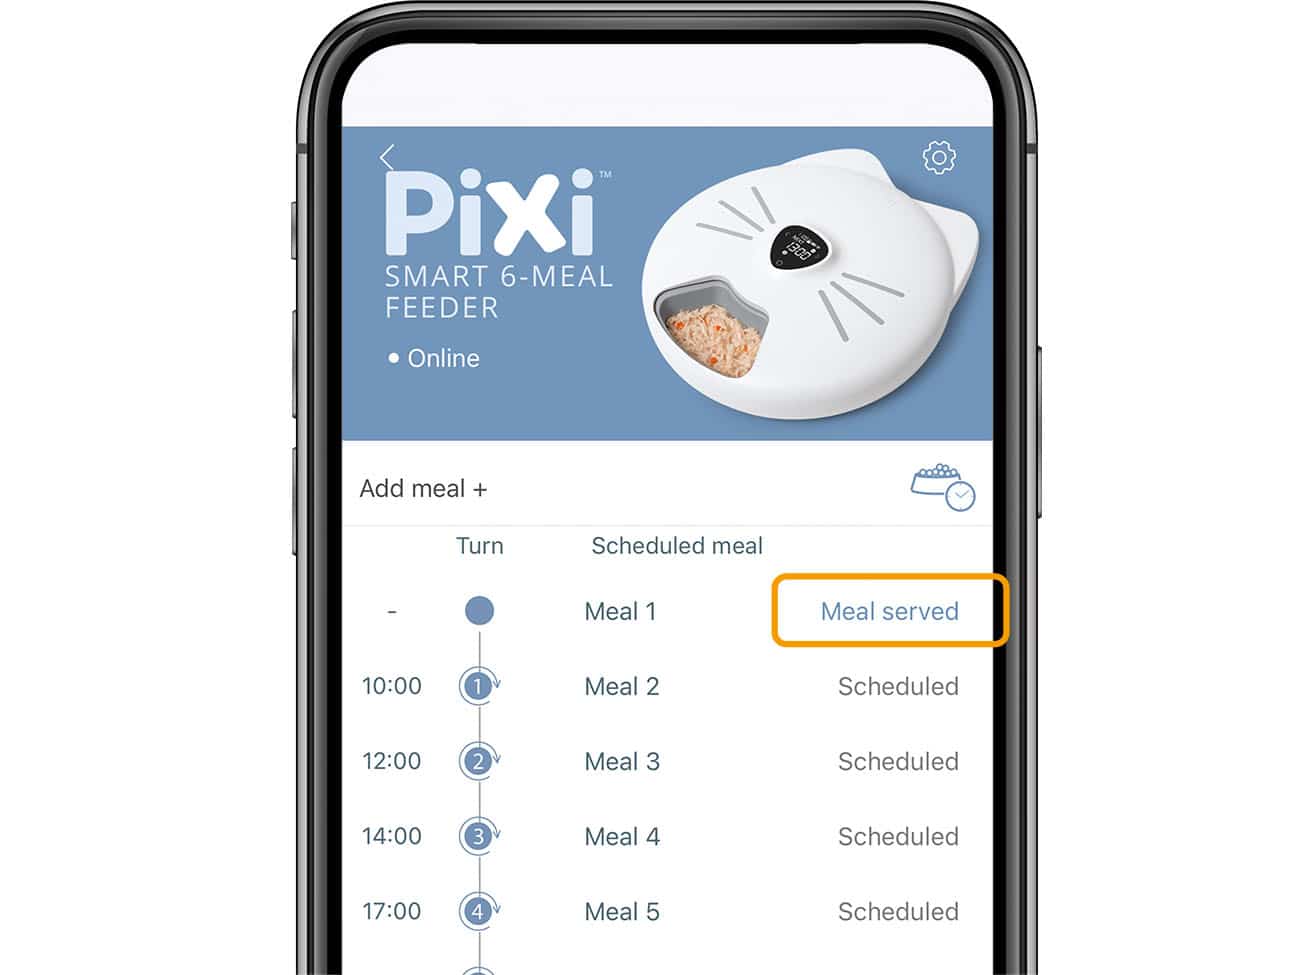 Meal served indication in PIXI app